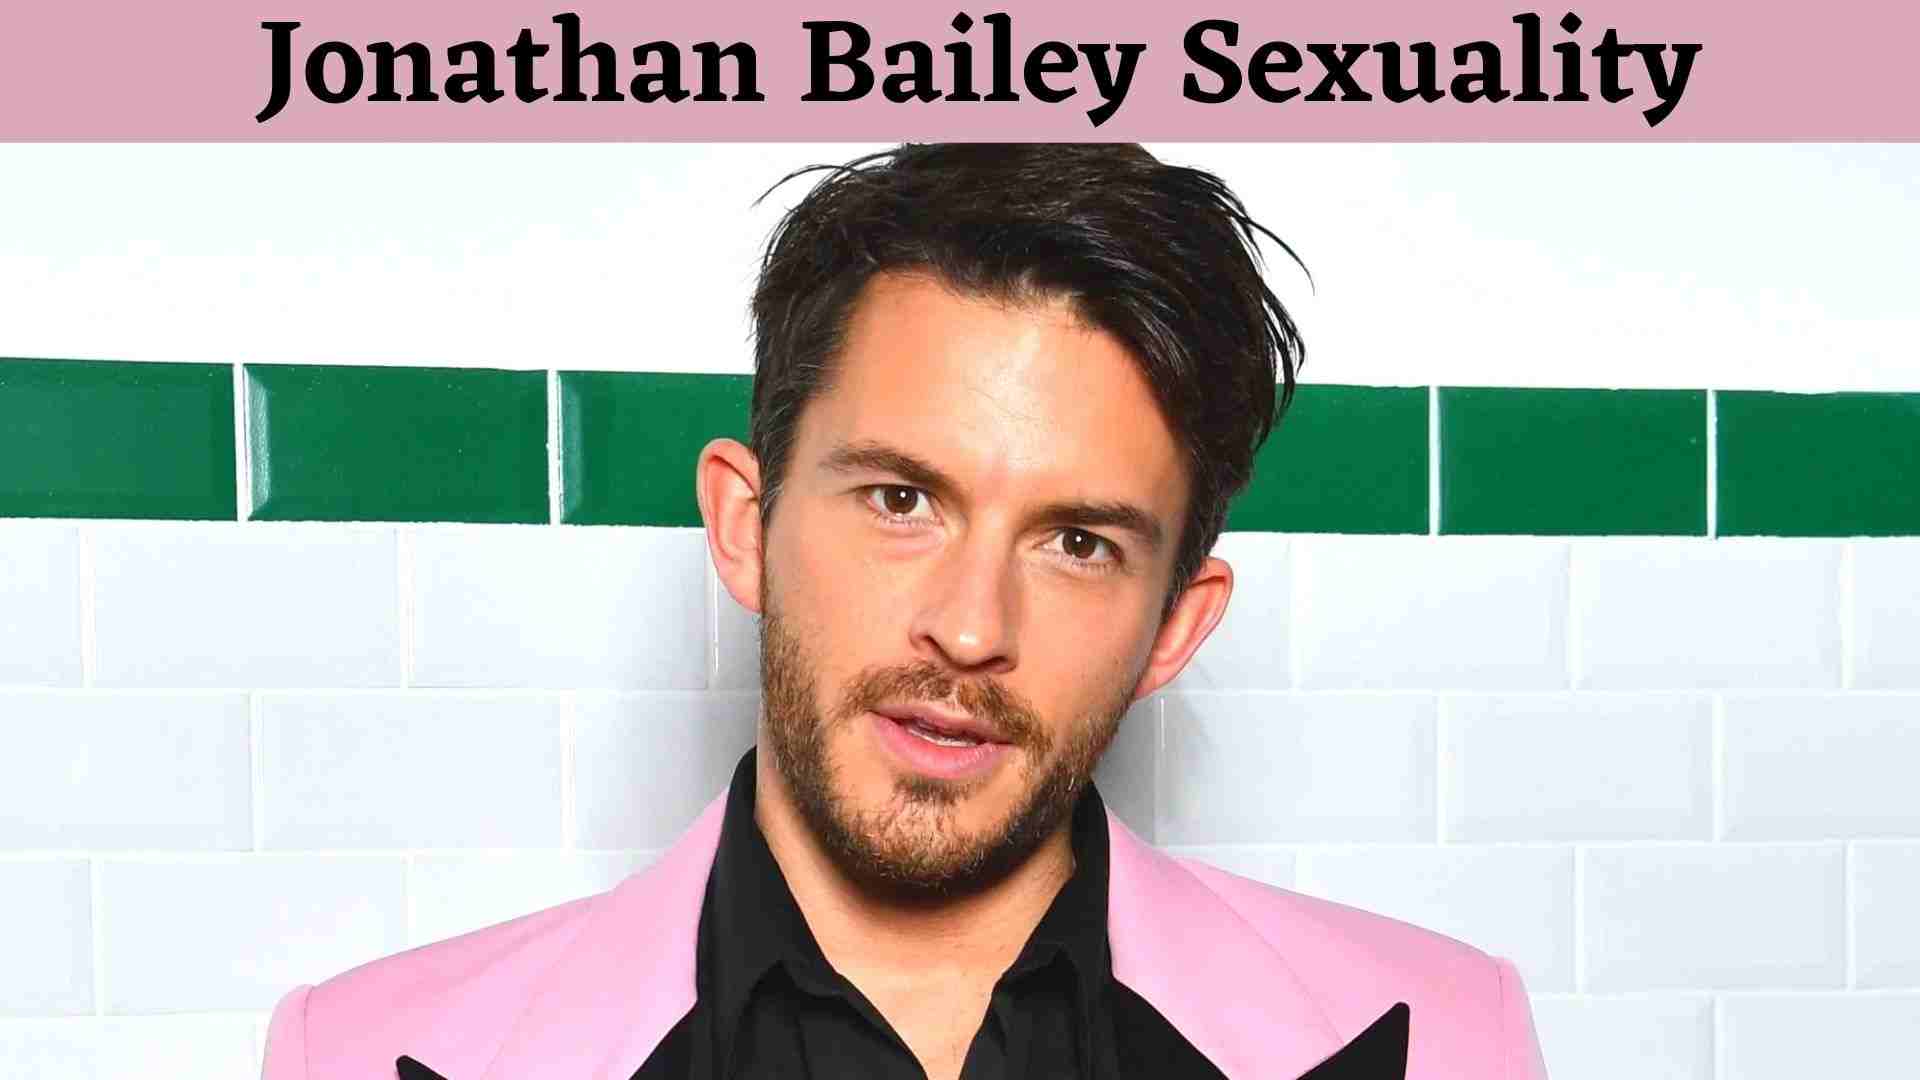 Jonathan Bailey Sexuality wallpaper and images